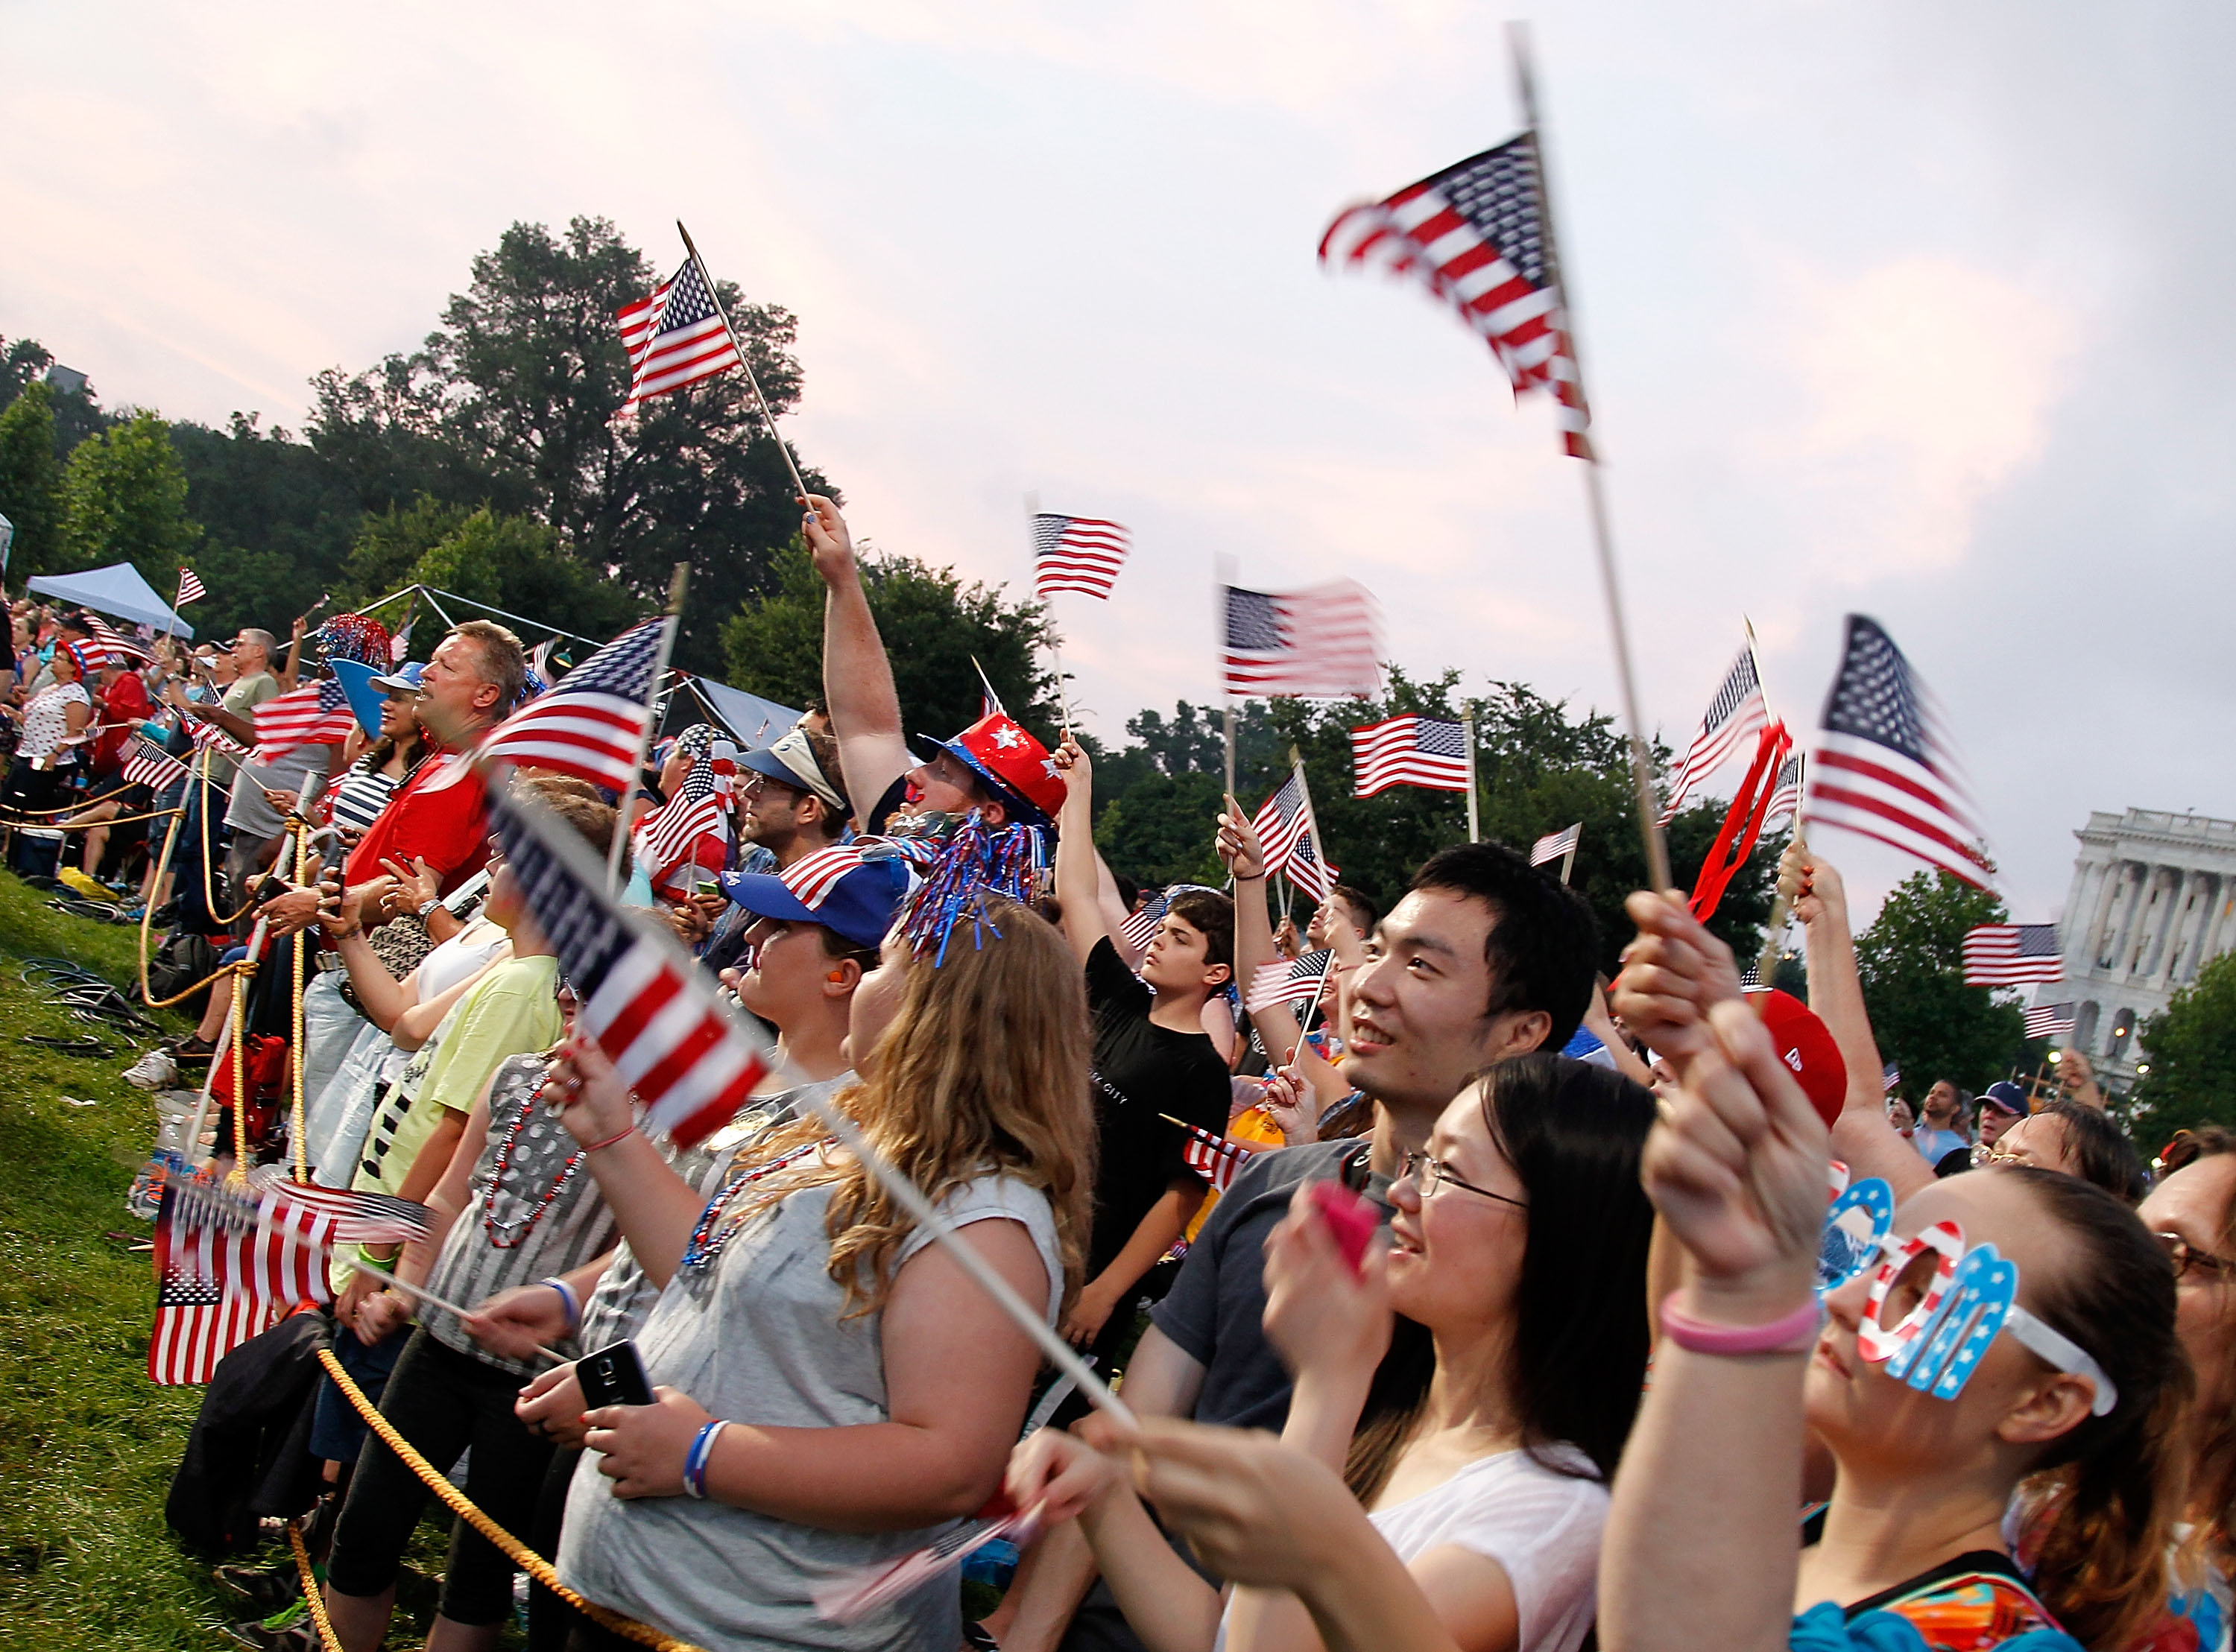 Tips for a safe, smooth July 4 in DC